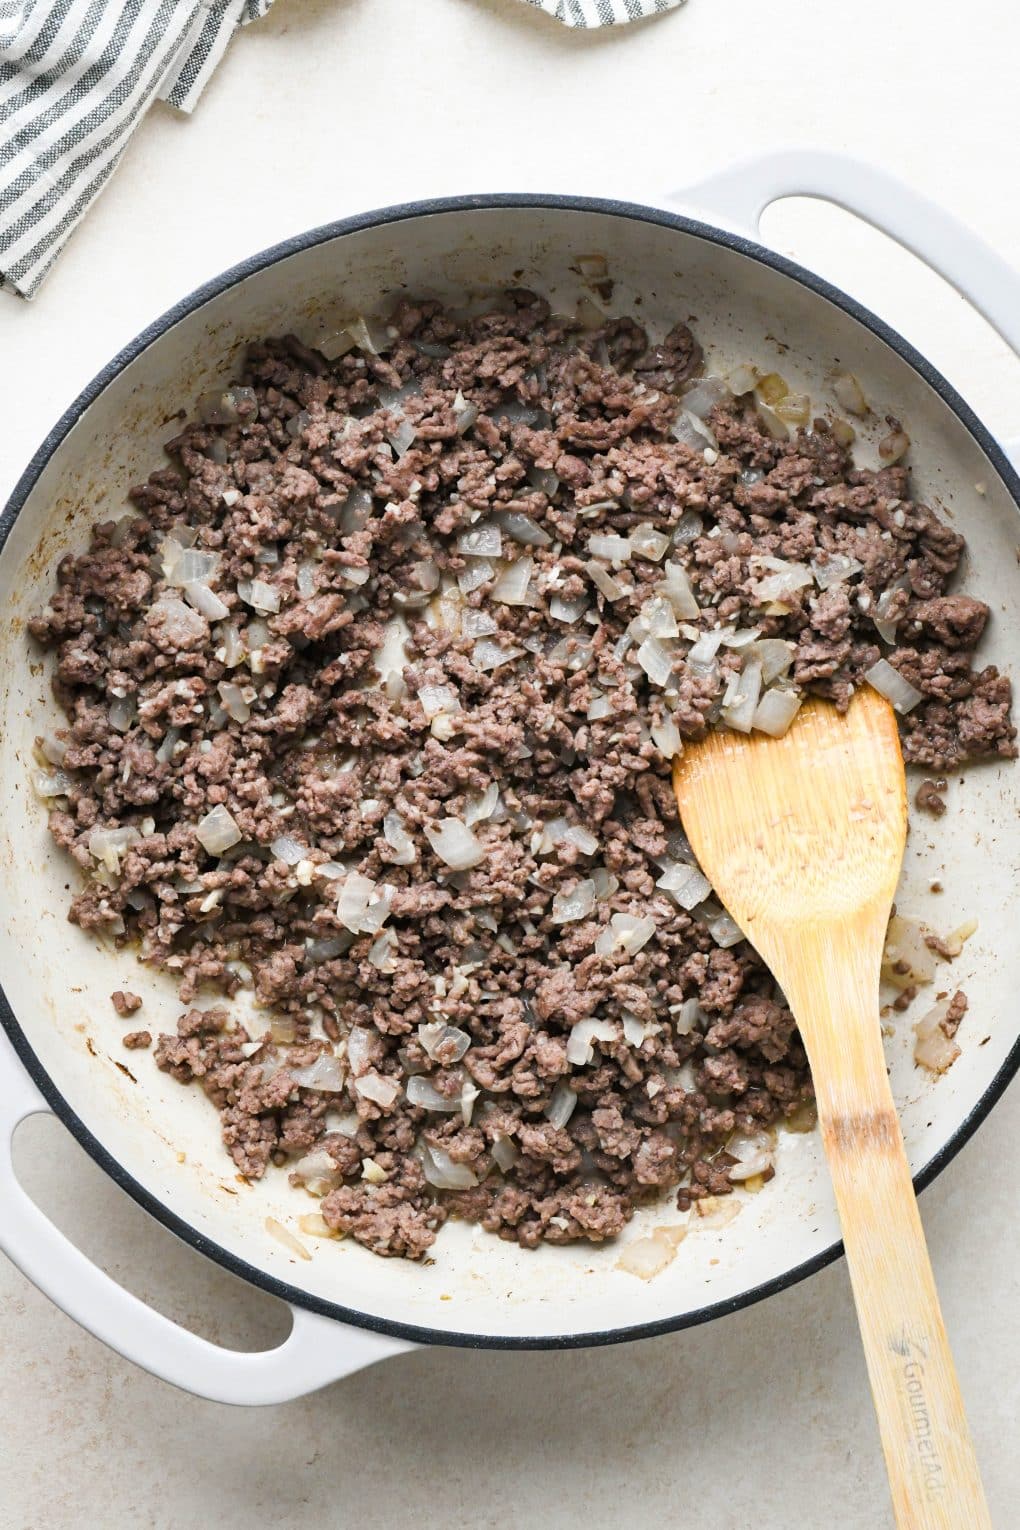 How to make Dairy Free Beef Stroganoff: Ground beef, onions, and garlic in the same skillet that the mushrooms were cooked in after removing them, beef browned and broken up.